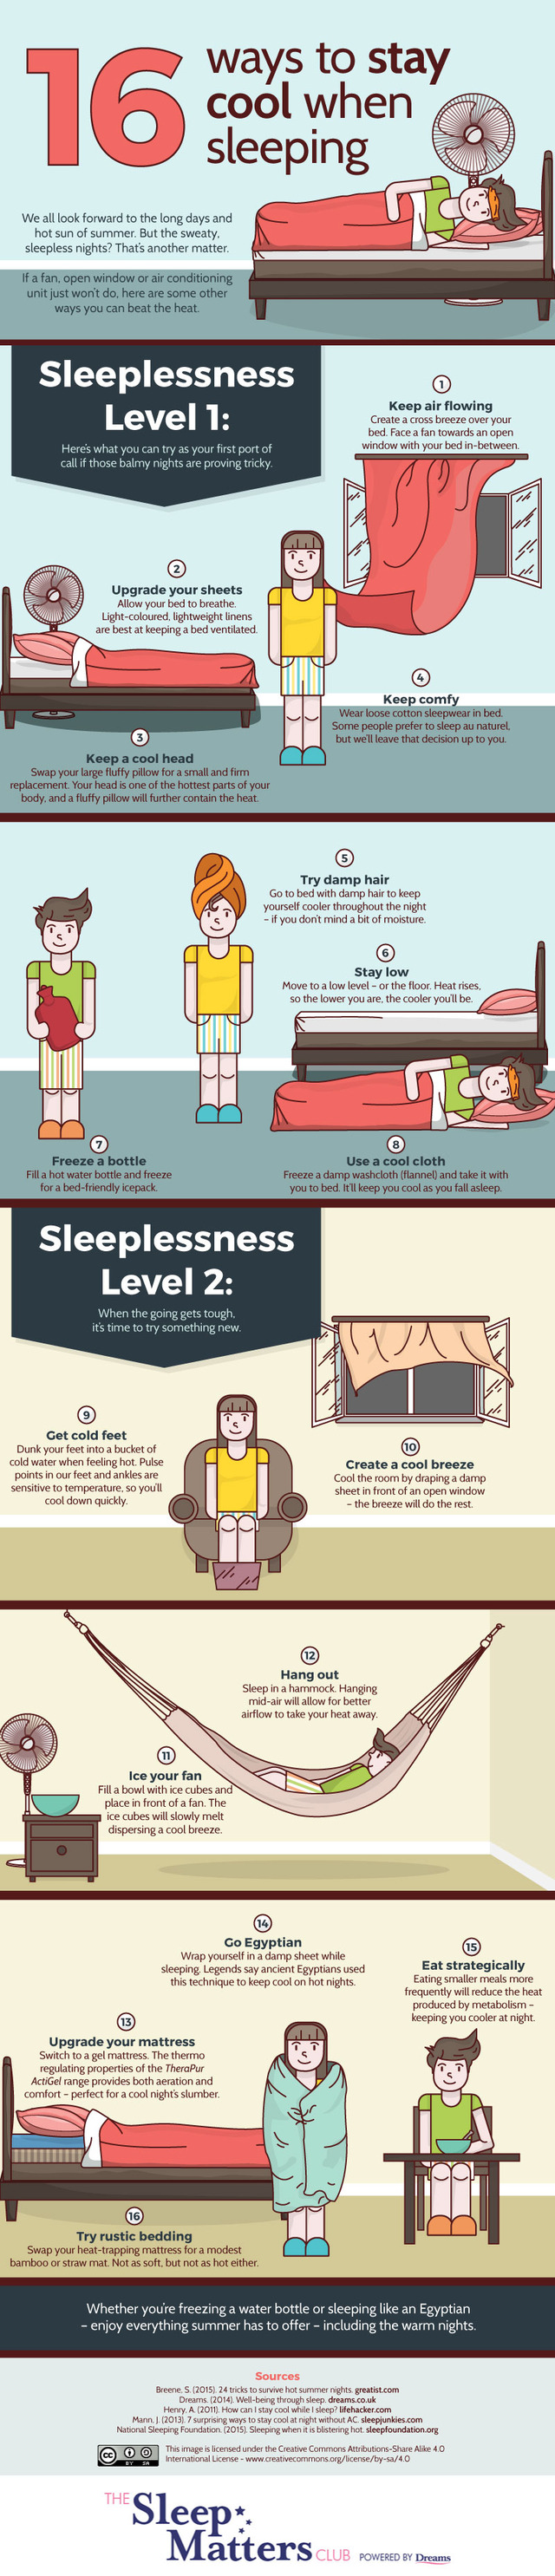 16-ways-to-stay-cool-when-sleeping-infographic